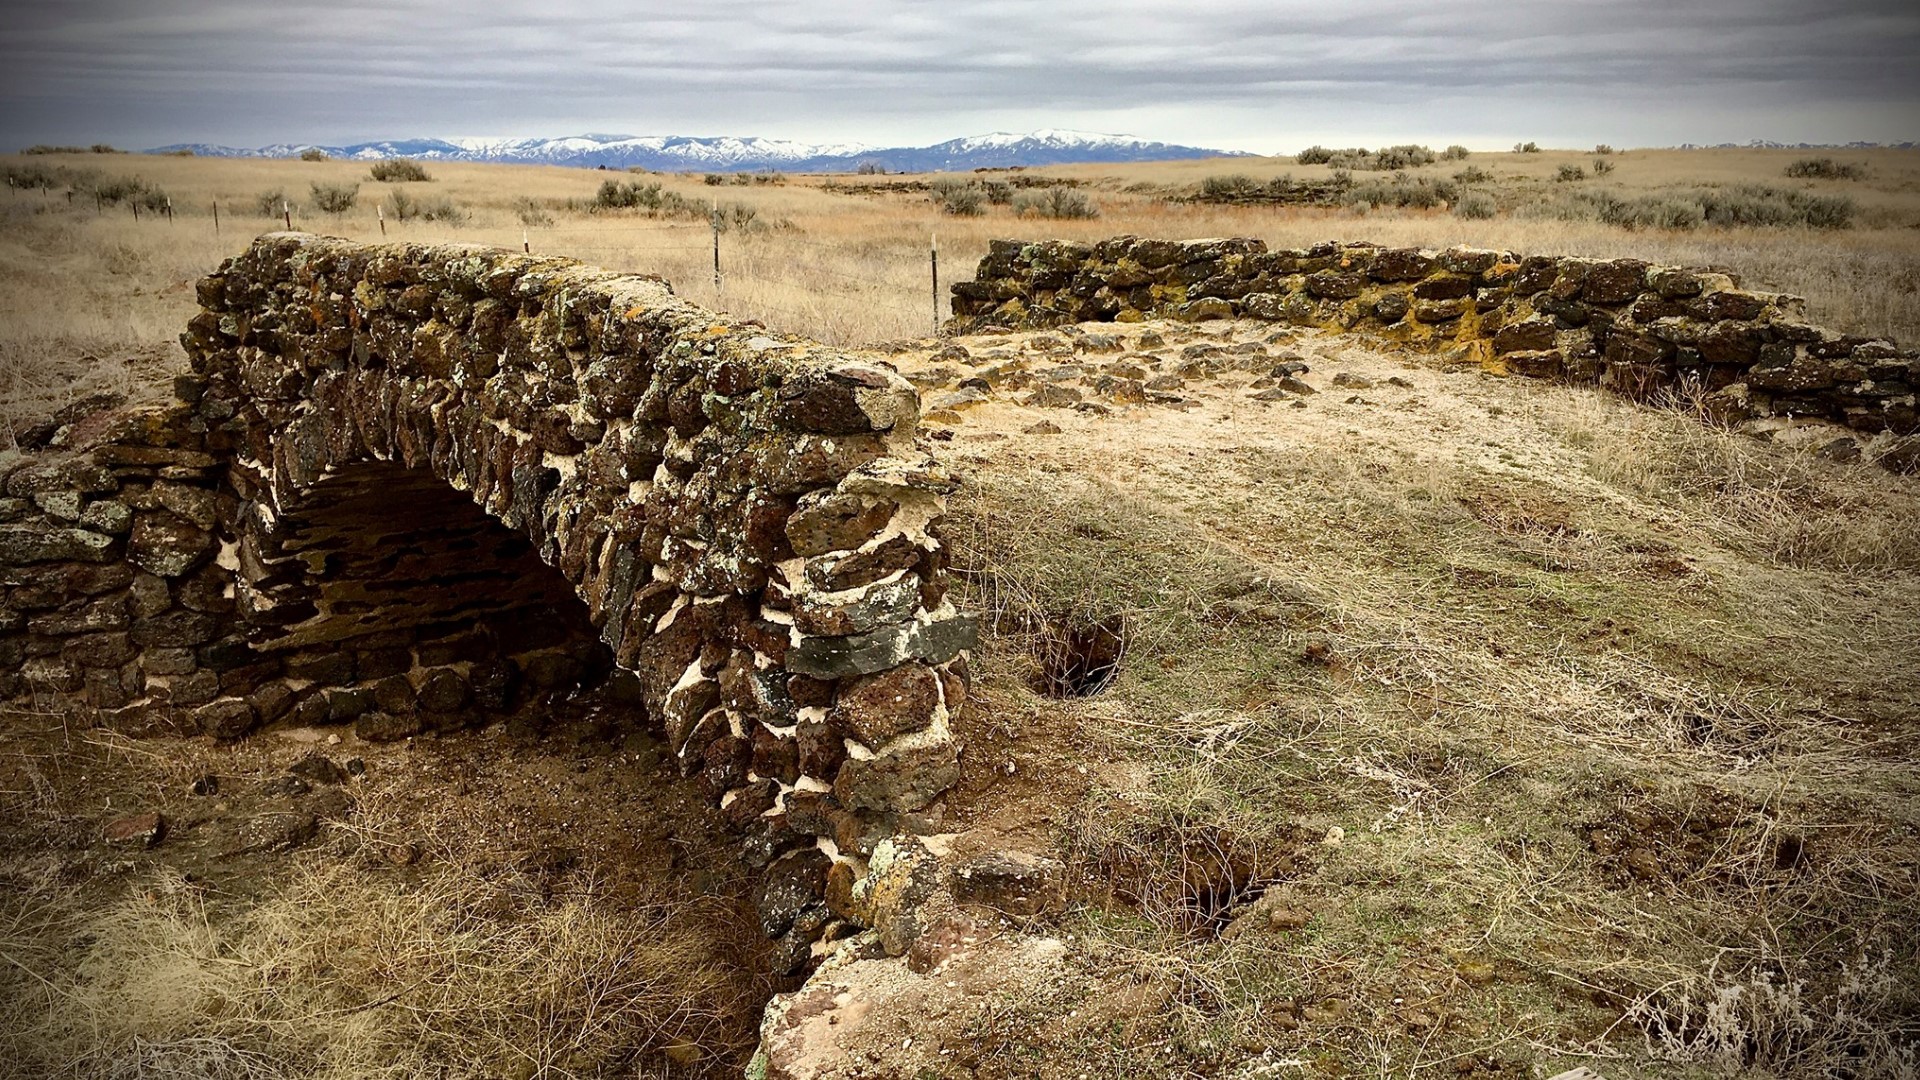 The stone arch bridge in the desert of southern Ada County raised some interesting history questions.